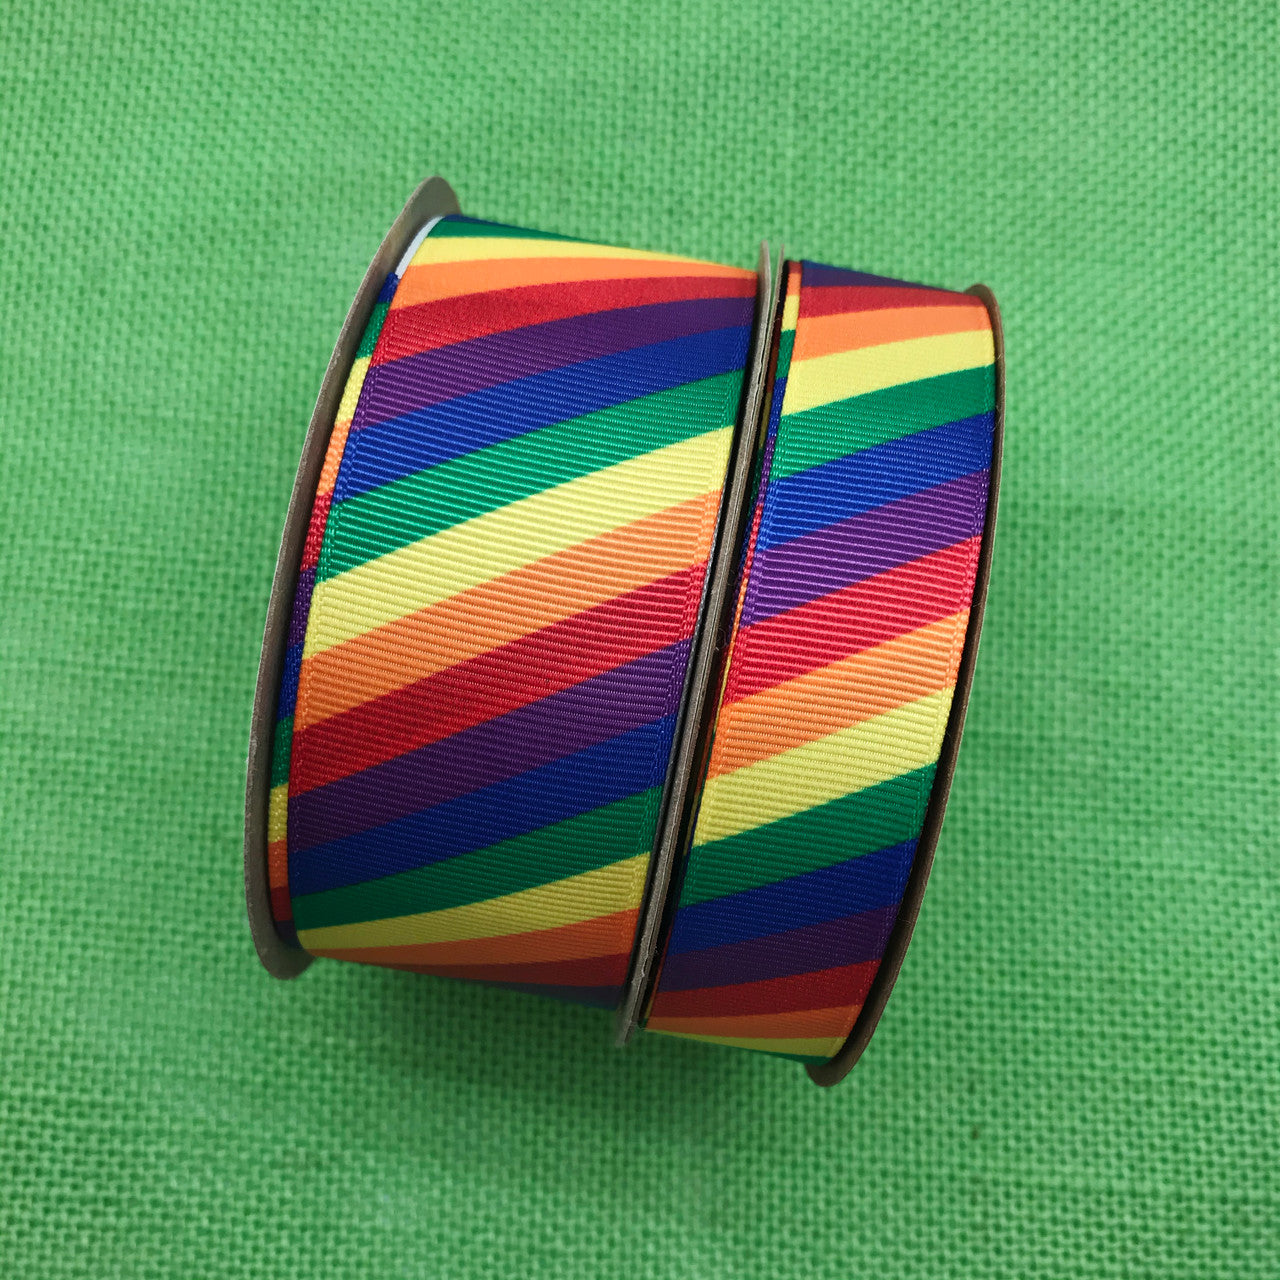 Our rainbow stripes in primary colors come in two different sizes for projects large and small. We offer these in 1.5" and 7/8" grosgrain!